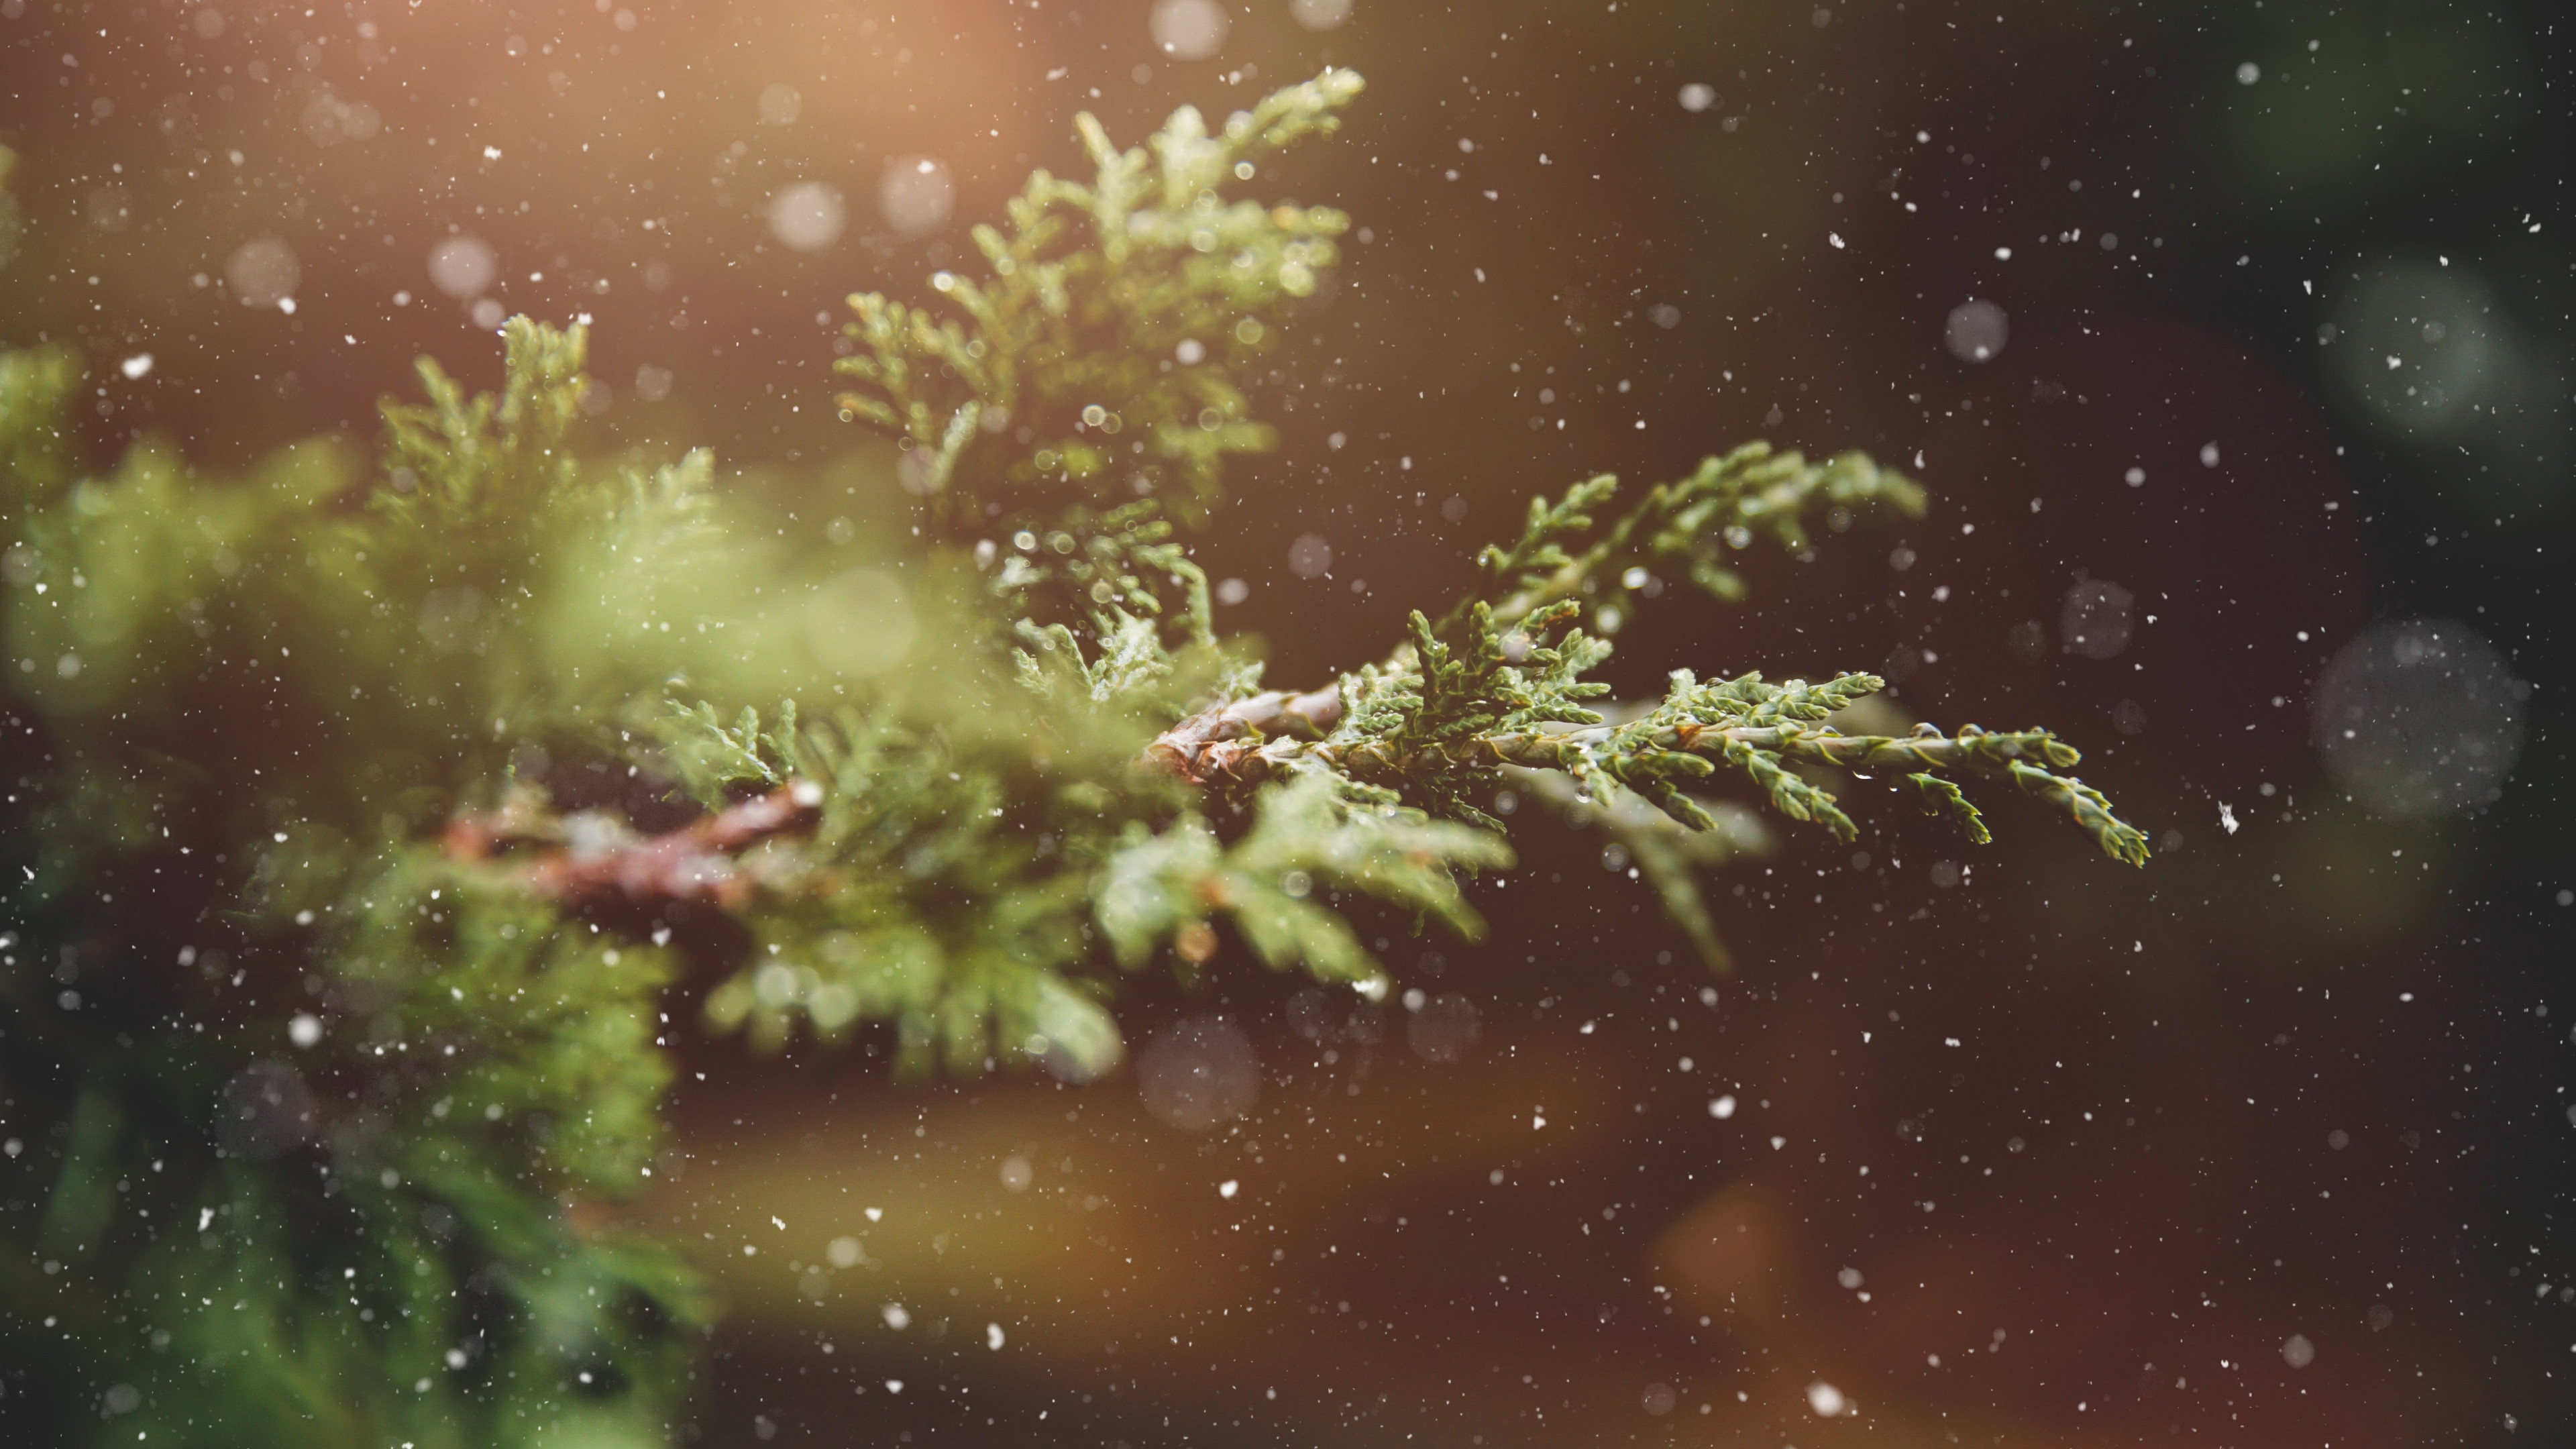 Snowflakes over the pine branch wallpaper 3840x2160